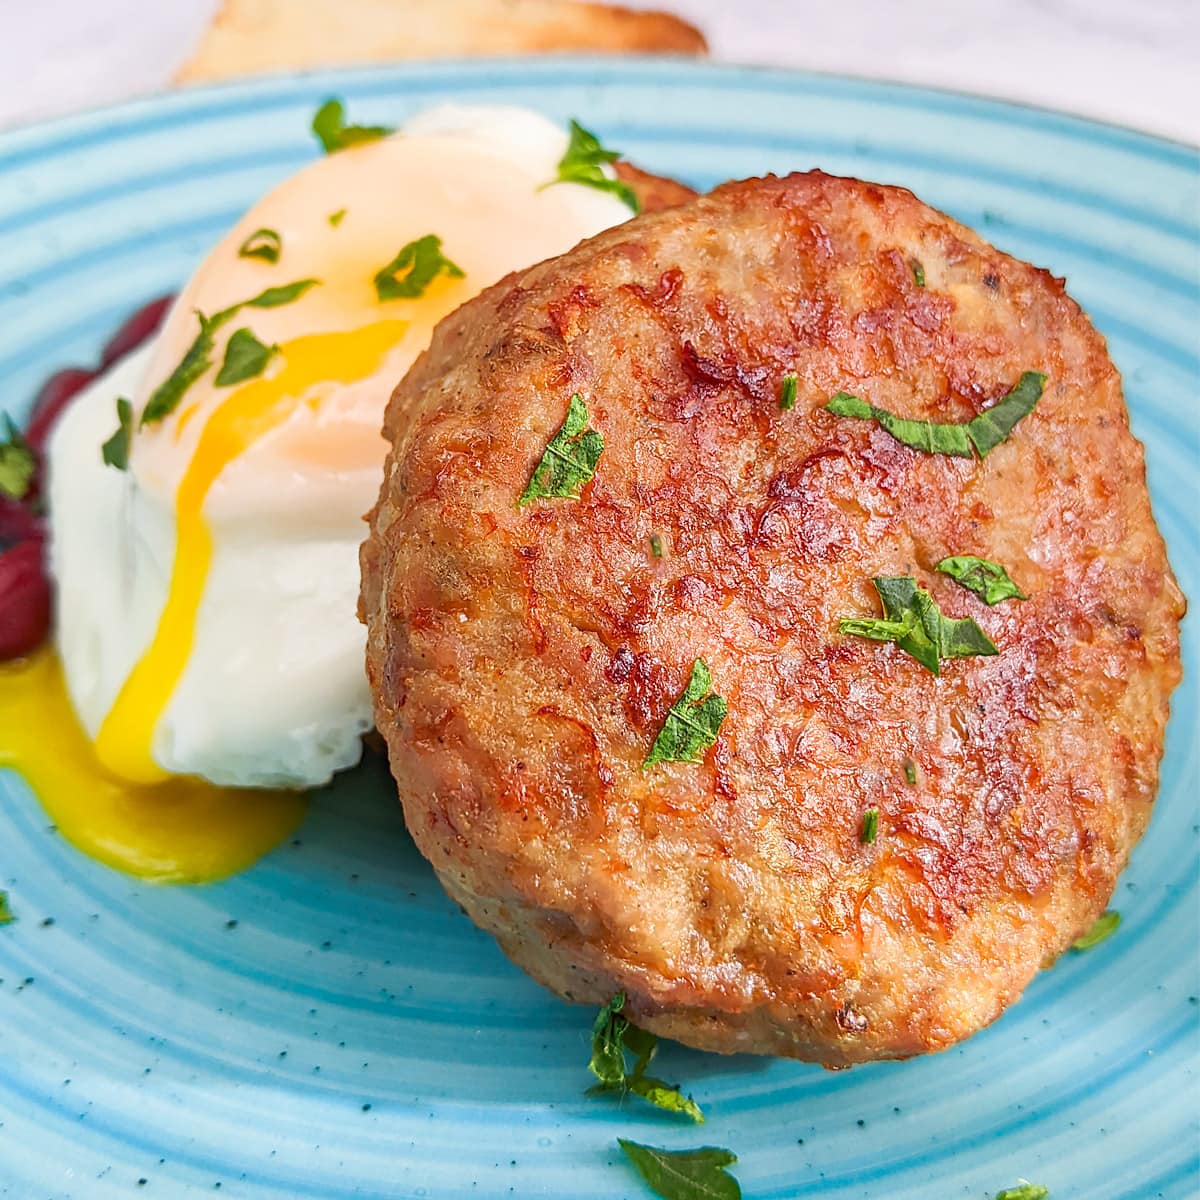 Close look of sausage patties with chopped parsley and egg.